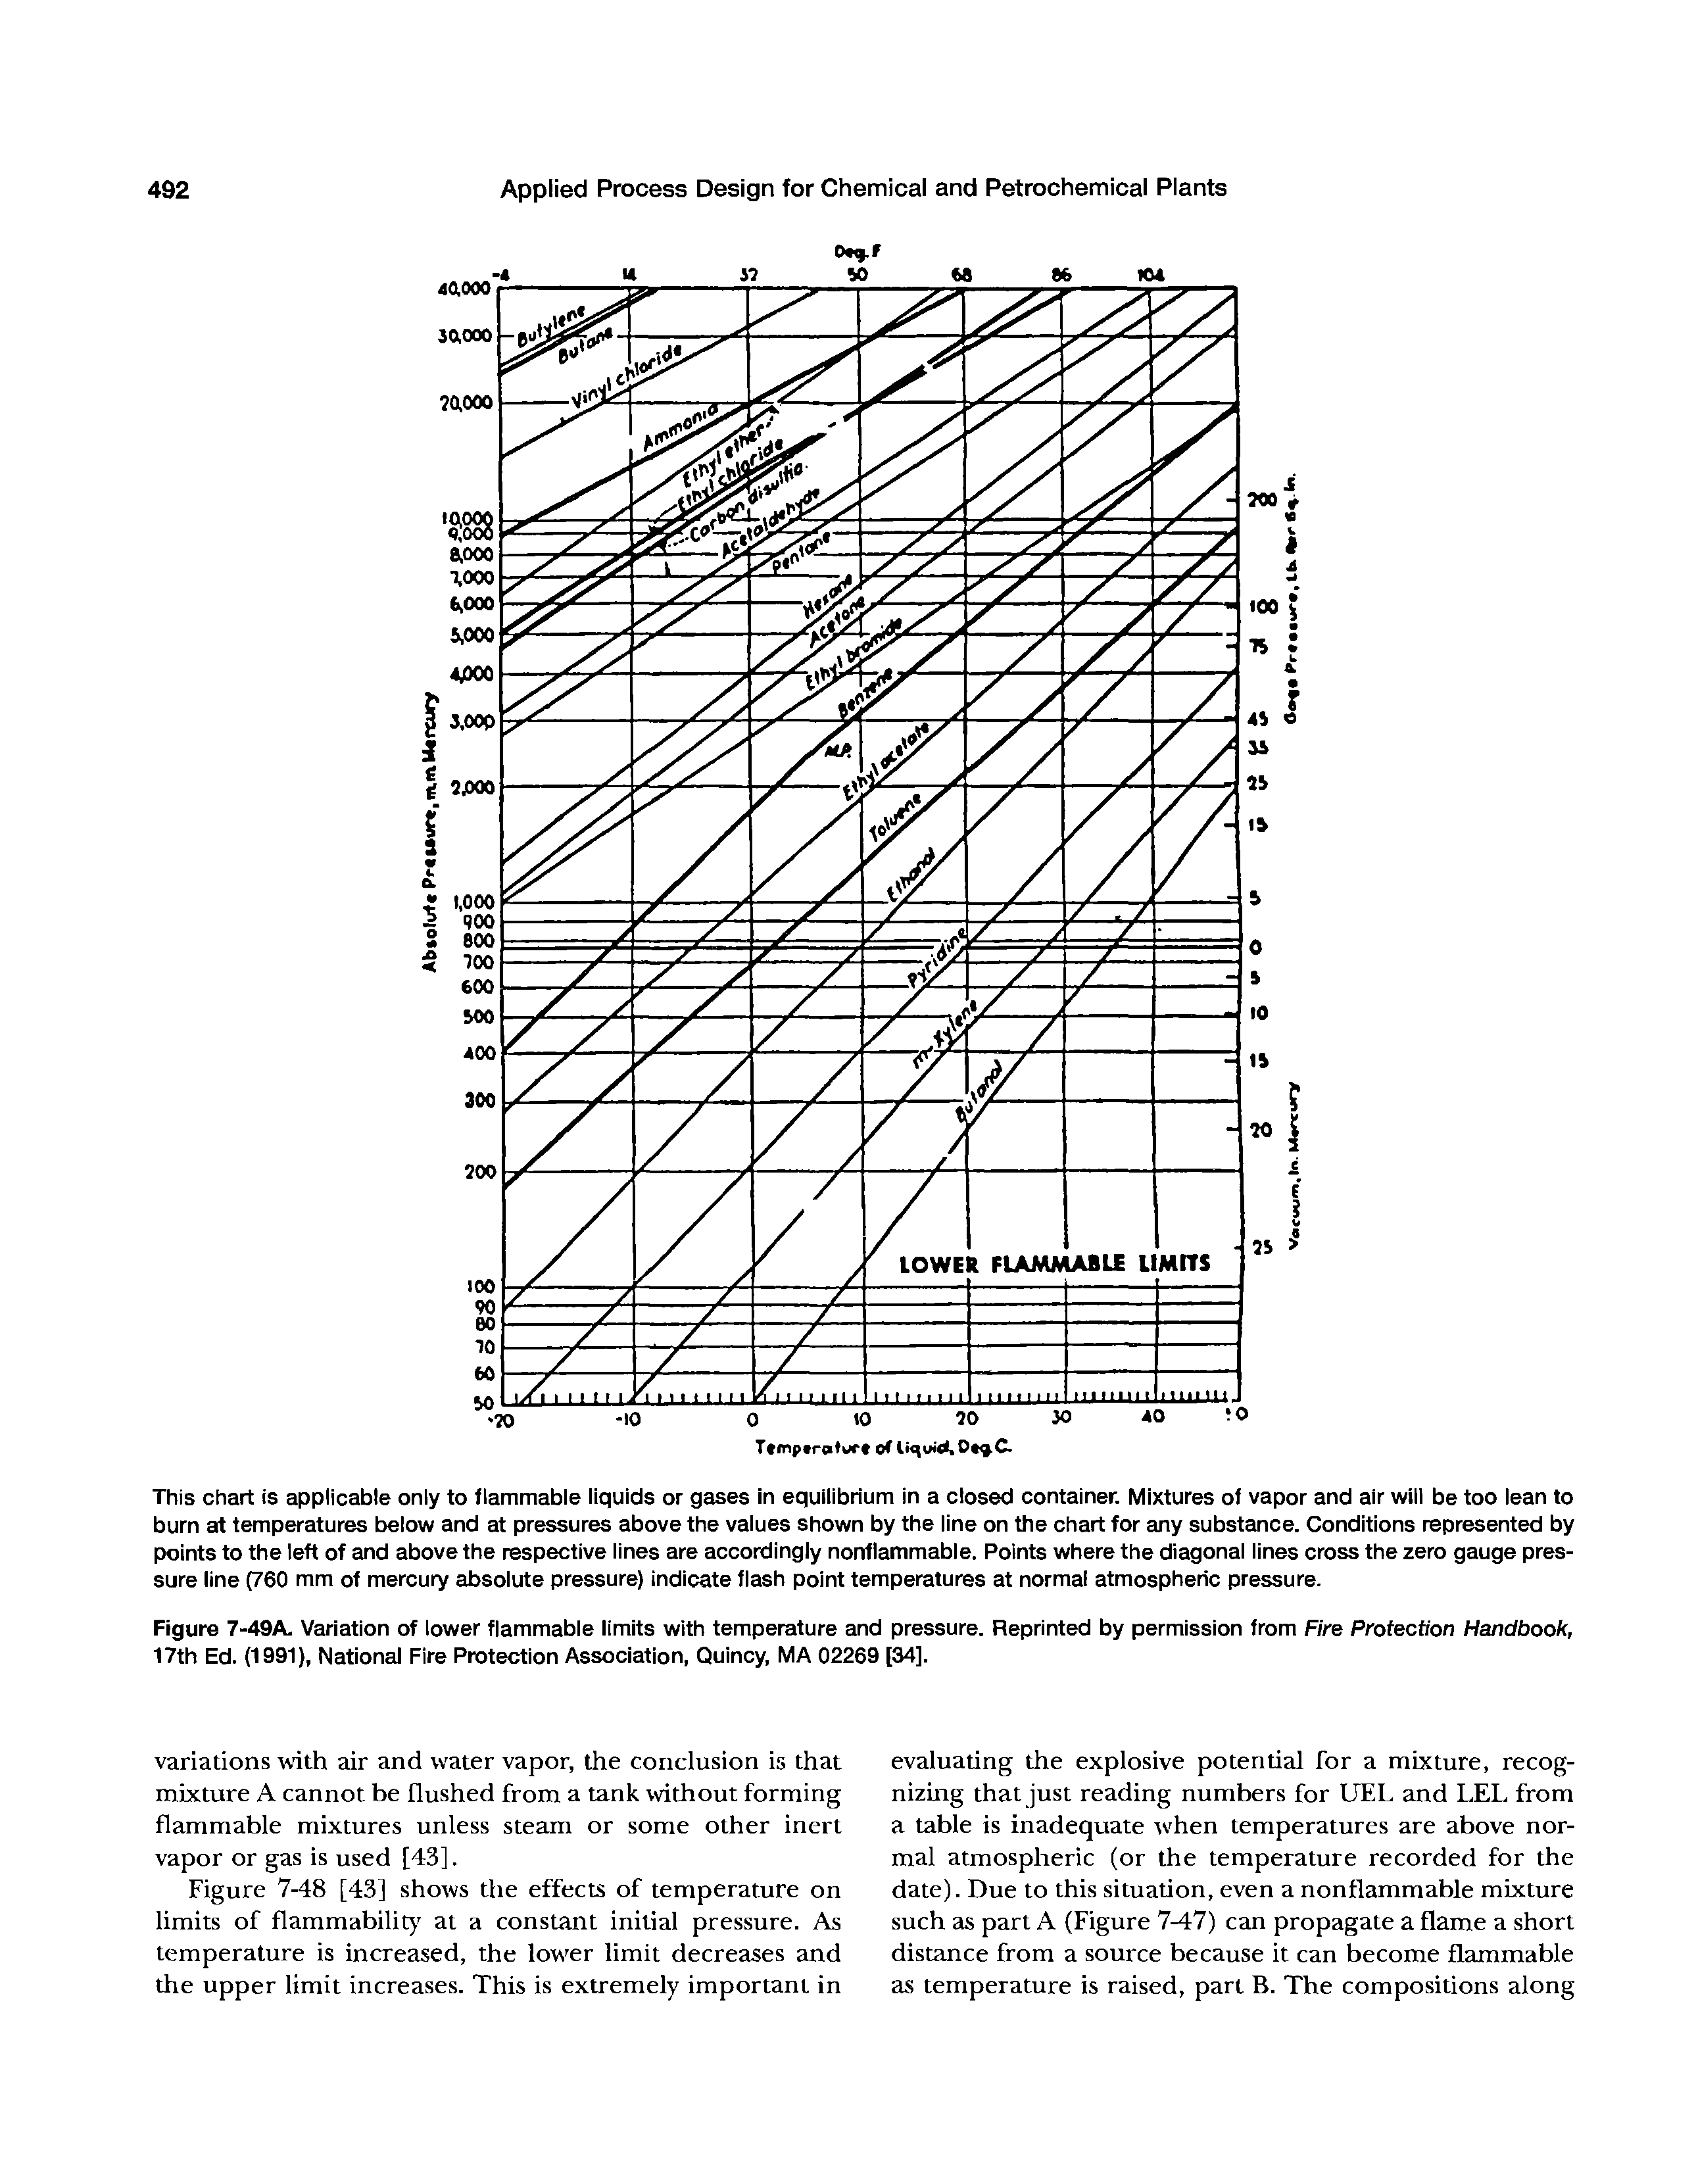 Figure 7-49A. Variation of lower flammable limits with temperature and pressure. Reprinted by permission from Fire Protection Handbook, 17th Ed. (1991), National Fire Protection Association, Quincy, MA 02269 [34].